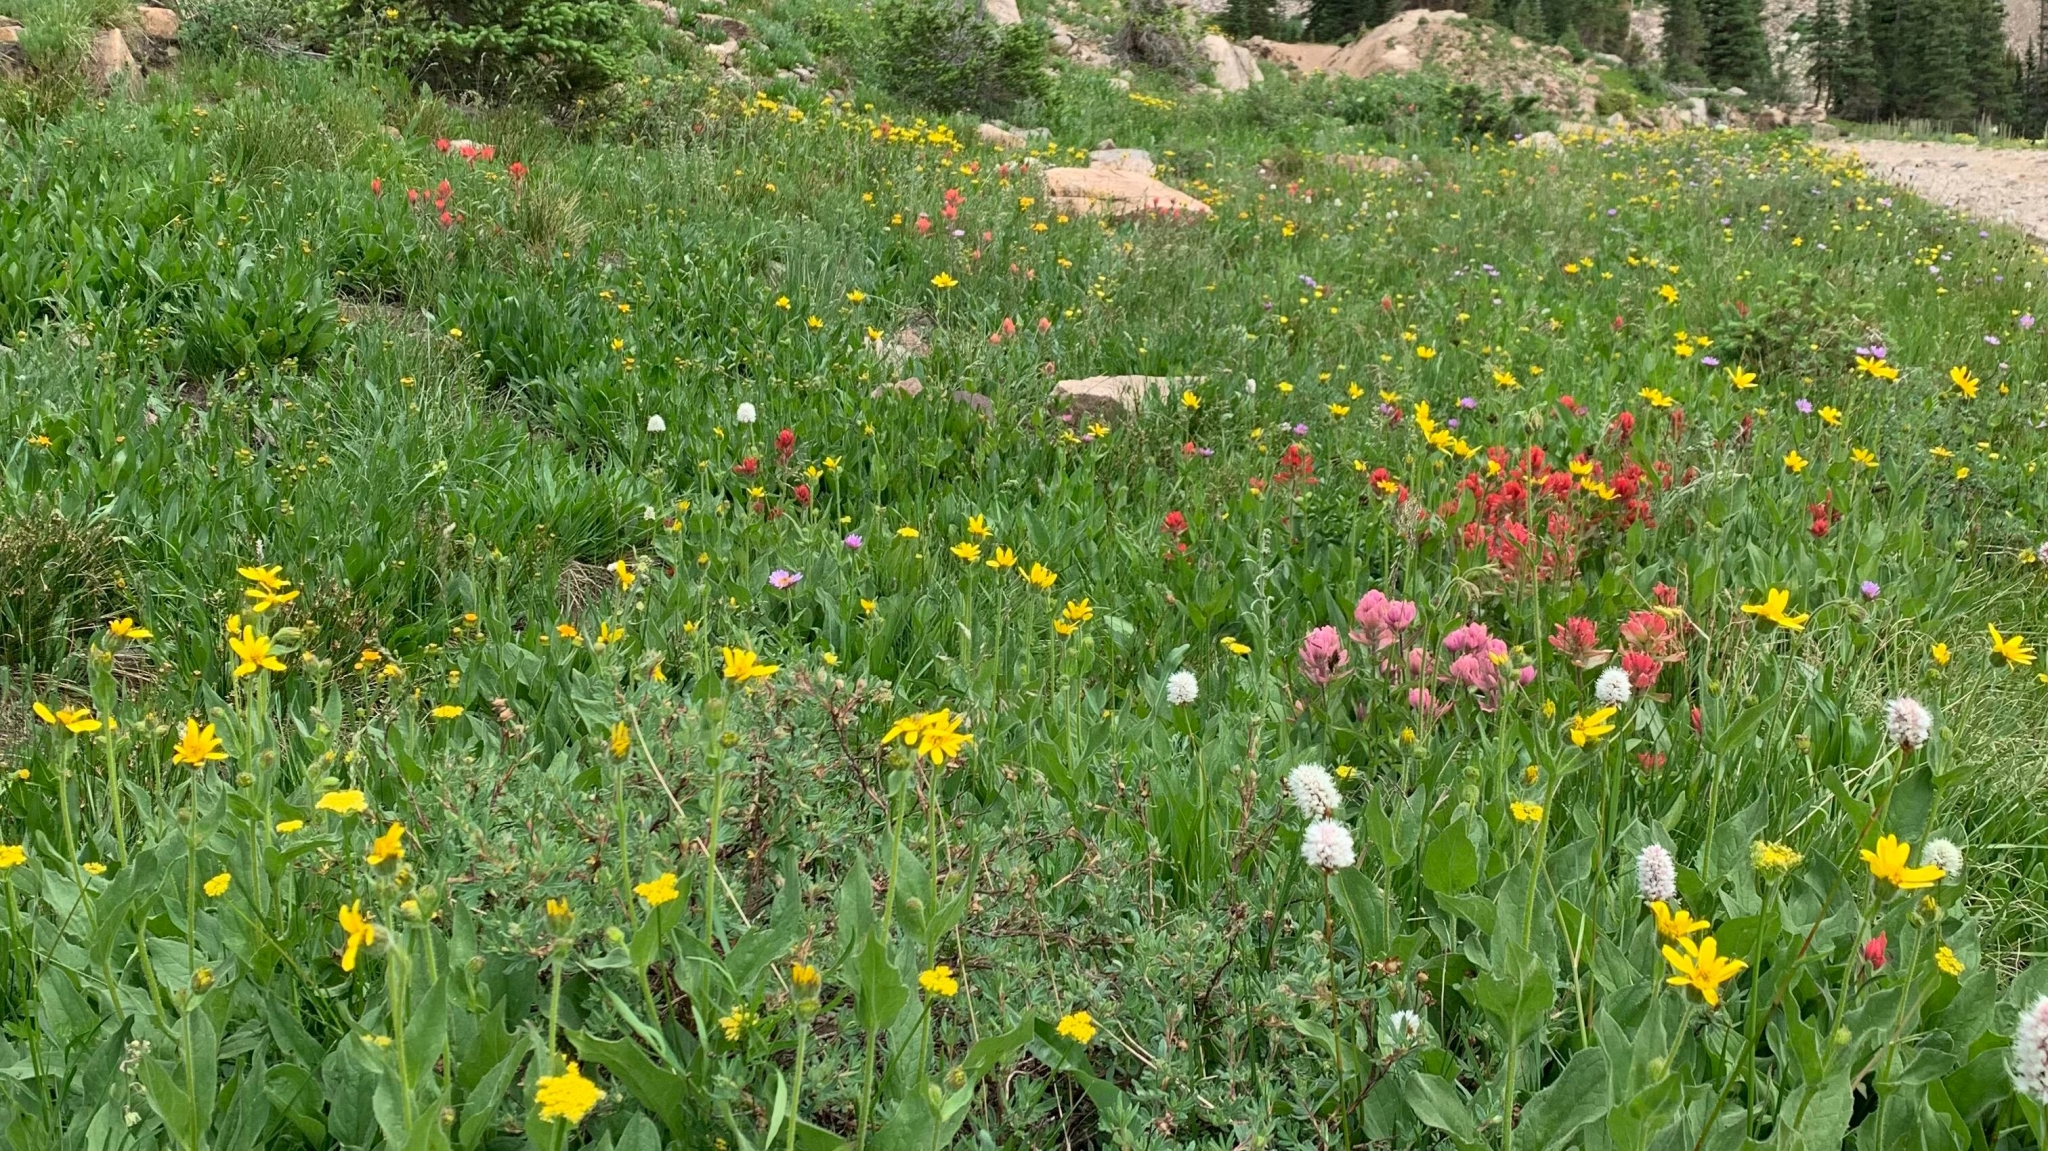 Wildflowers on a trail in the mountains.